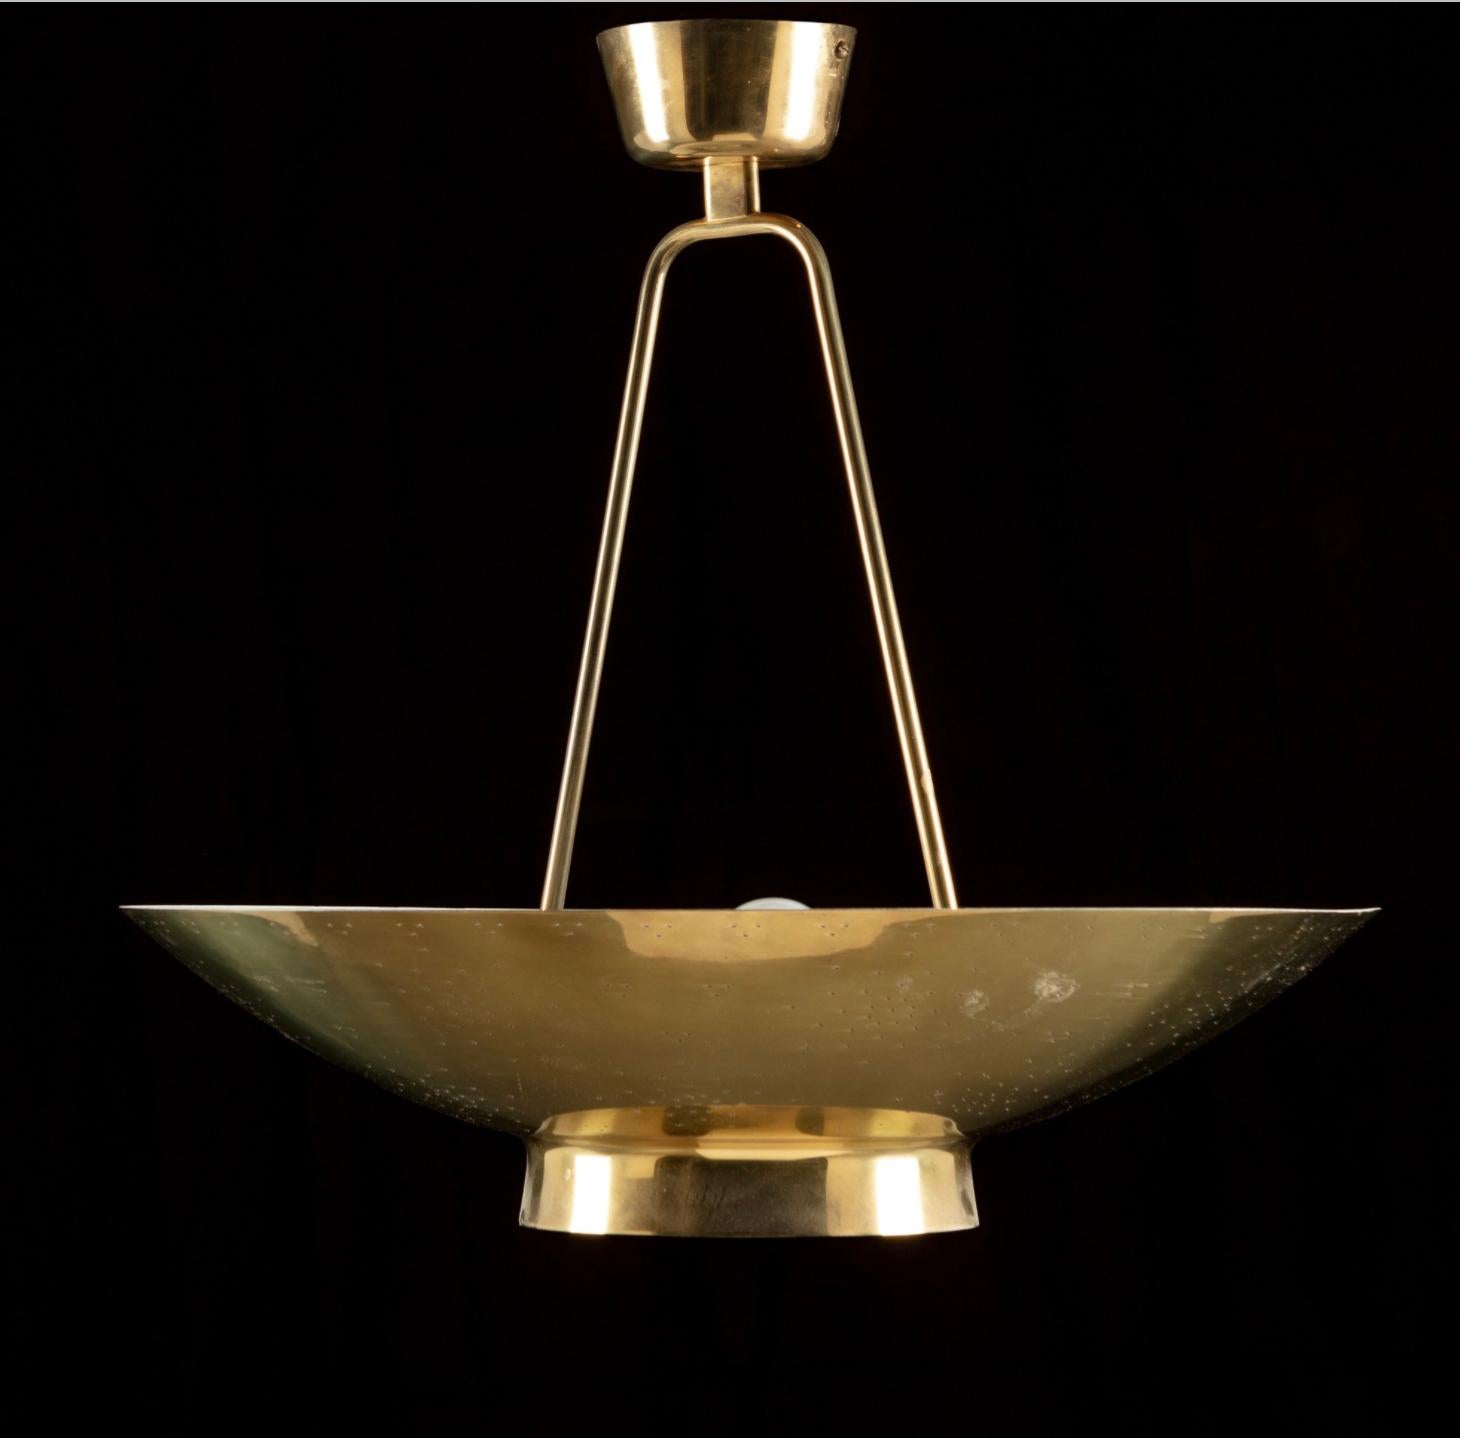 A ceiling light designed by Paavo Tynell for the UN Secretary-General's office, Model 9060. Manufactured by Idman, Finland, Circa 1950th.
Perforated polished brass, 4 sockets. Marked by manufacturer.
The Net price included UL listed rewiring.